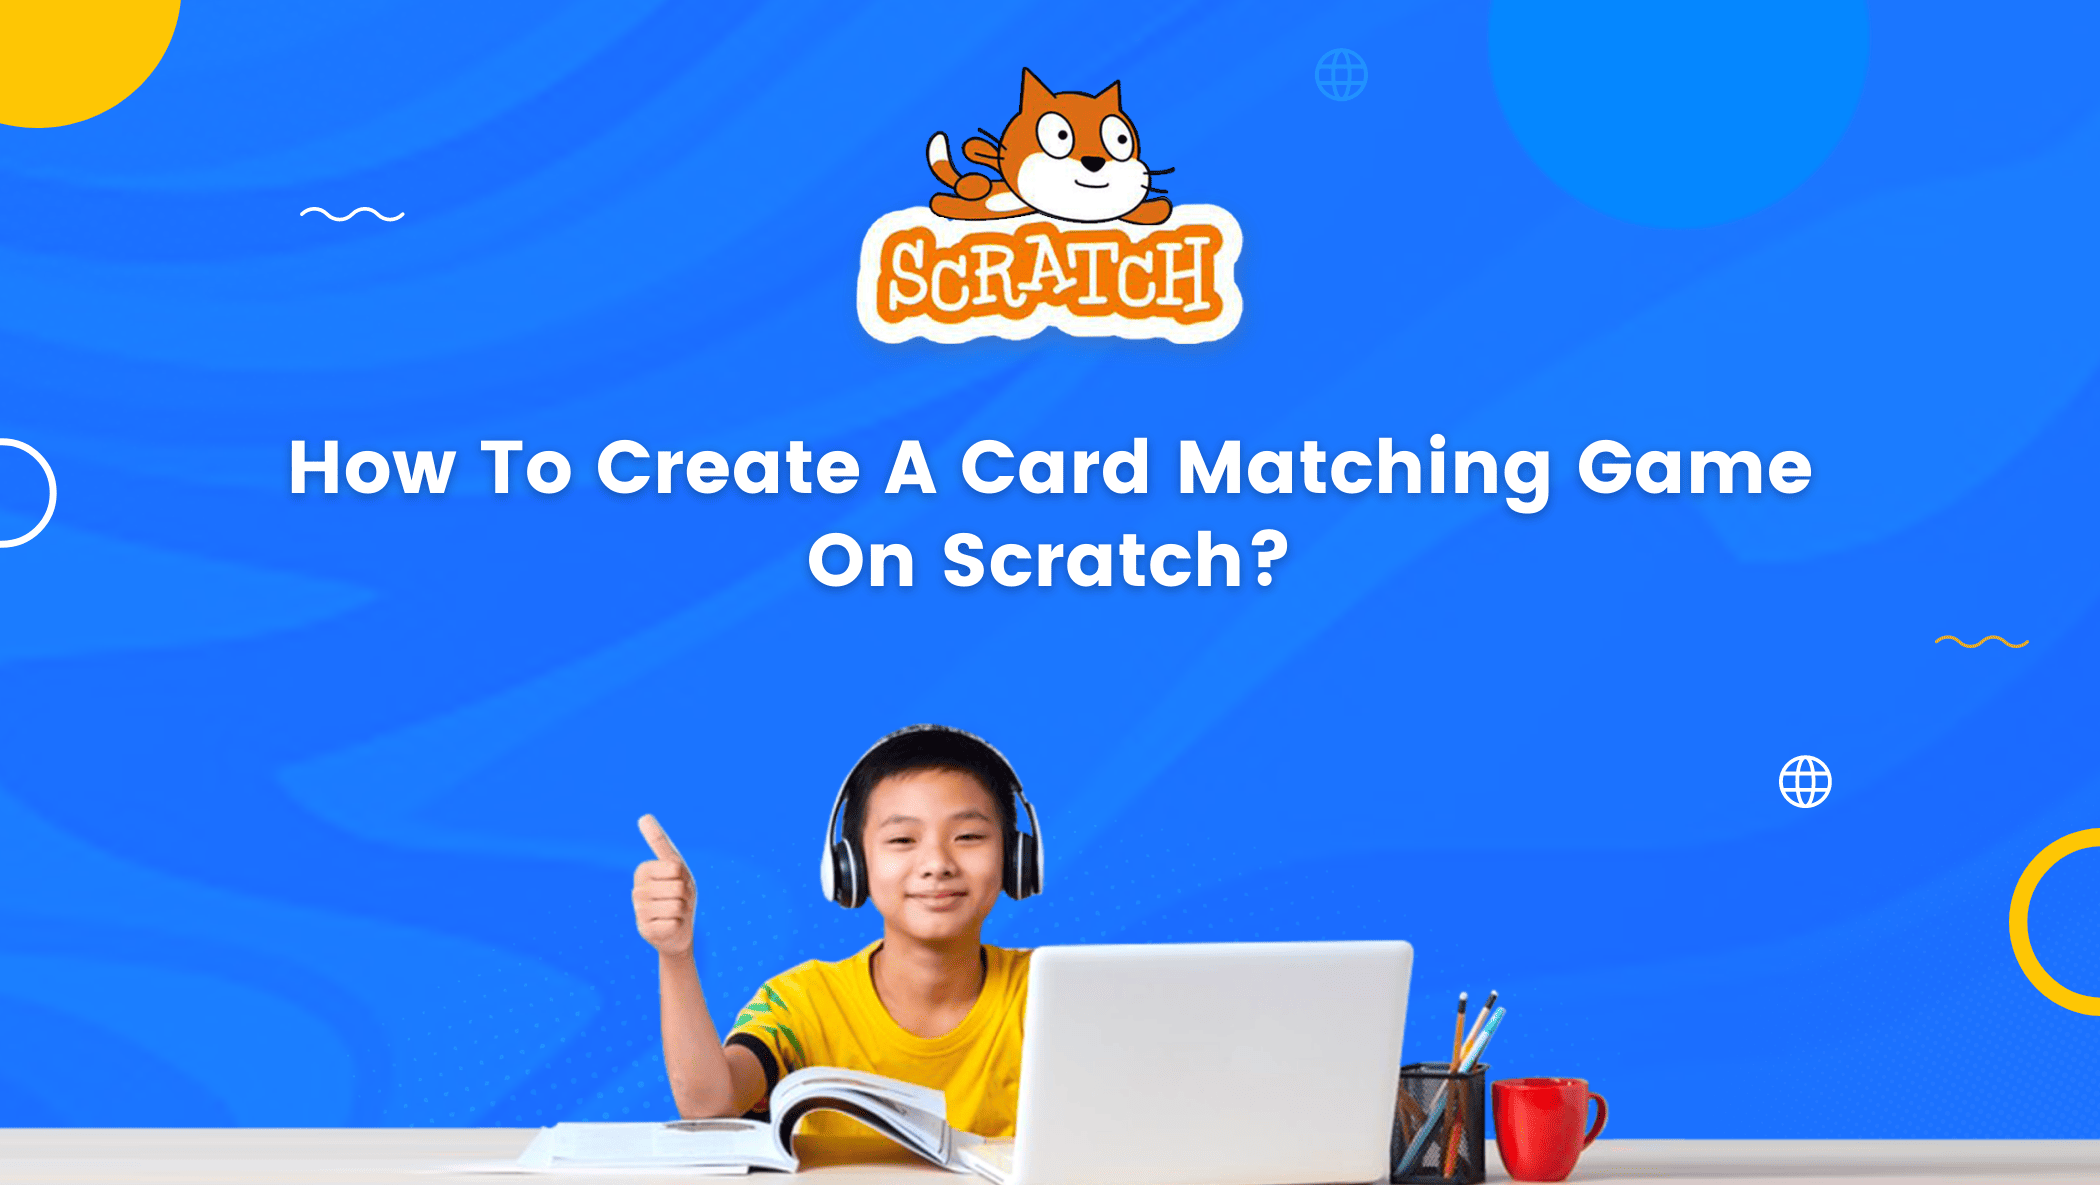 How To Create A Card Matching Game On Scratch